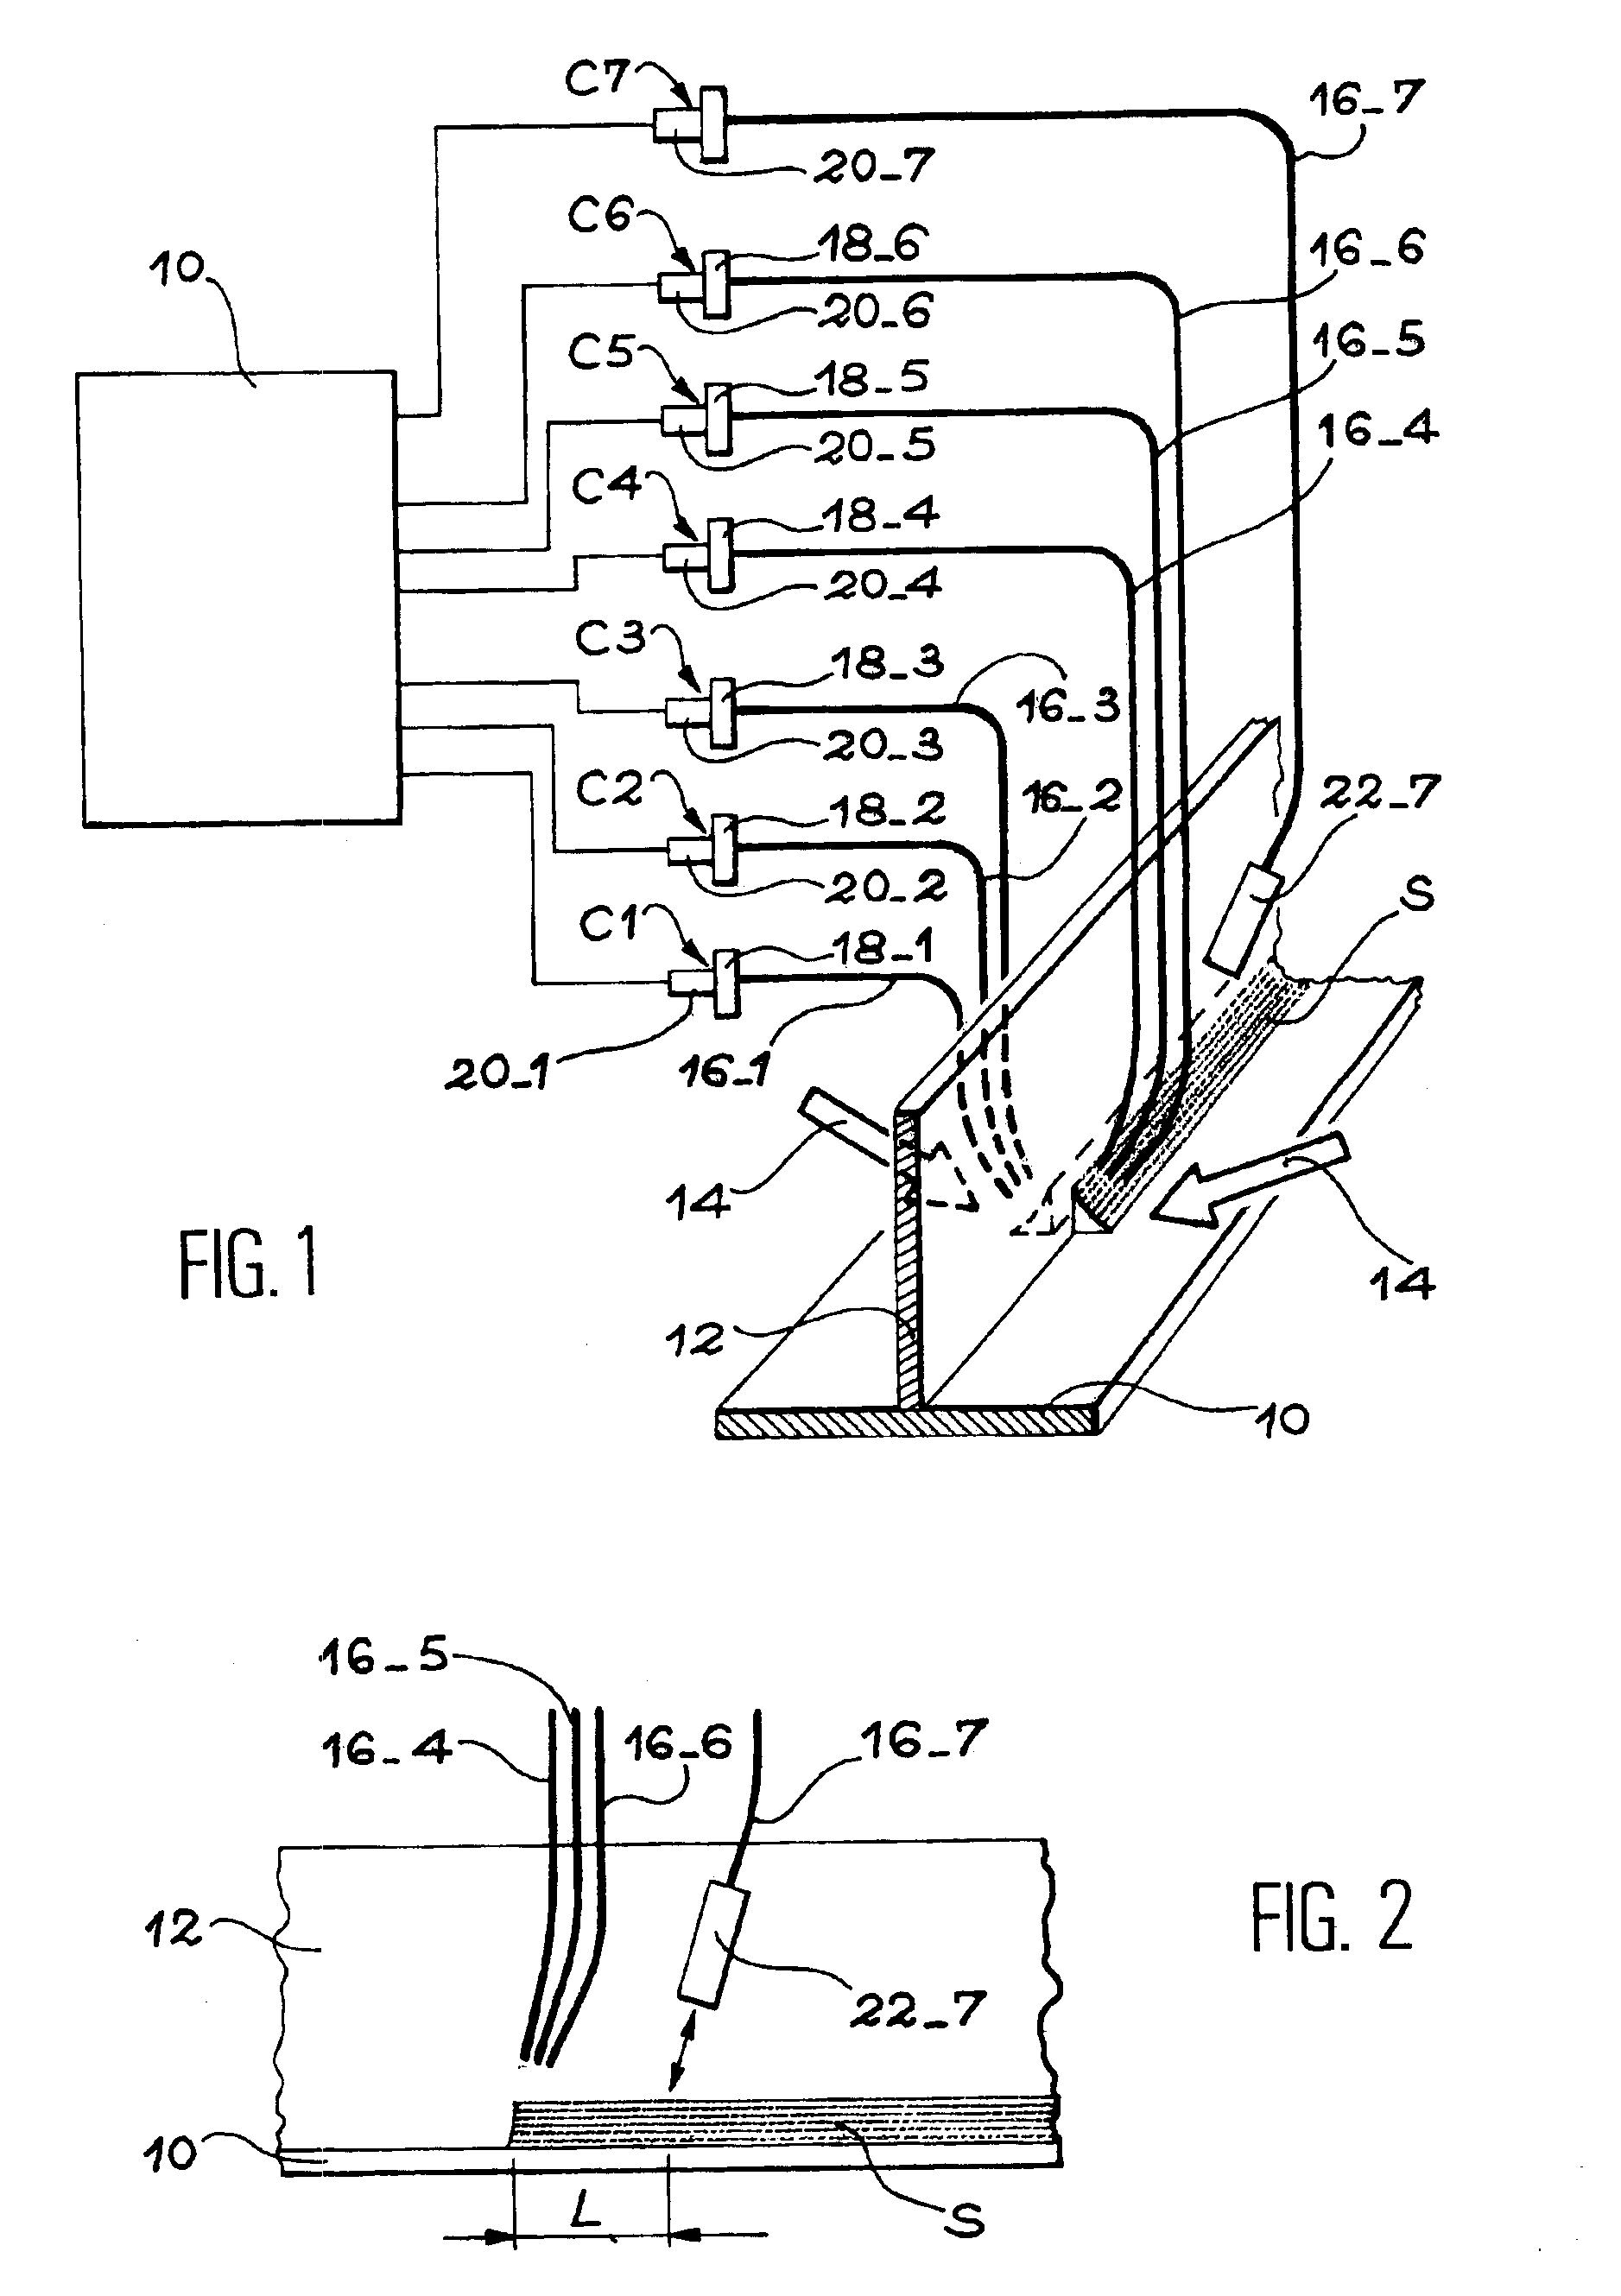 Method for detecting and identifying defects in a laser beam weld seam